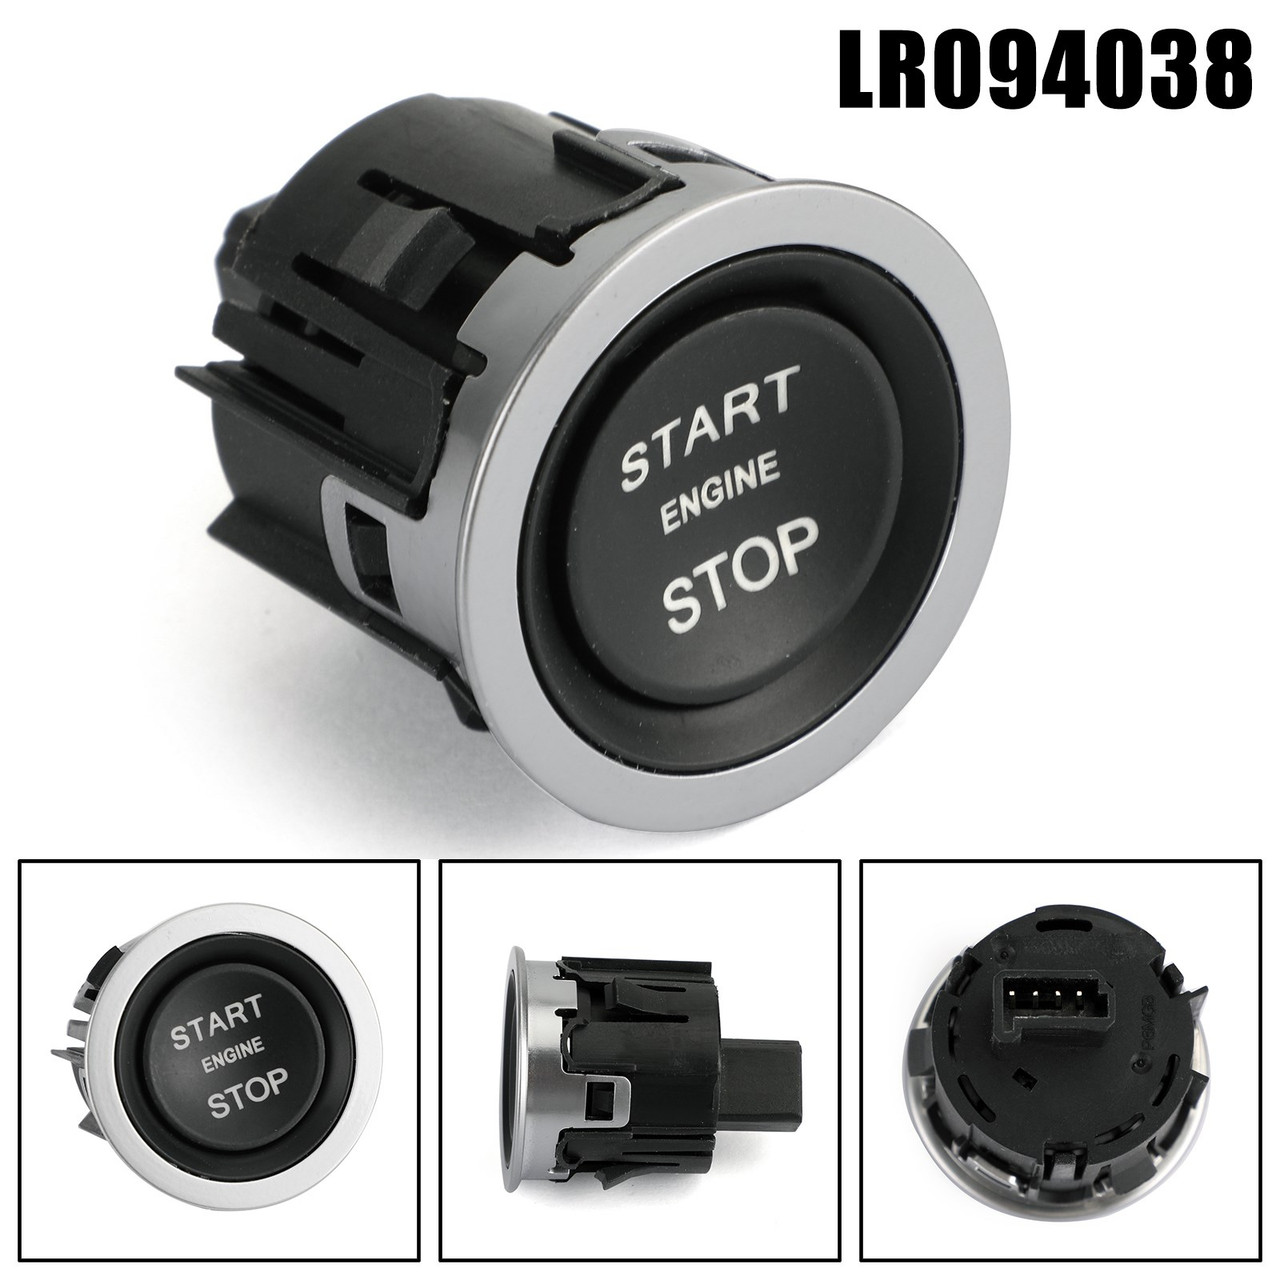 Start Stop Engine Button Push Button Switch Cover LR094038 Fit for Land Rover Discovery SPORT 13-15